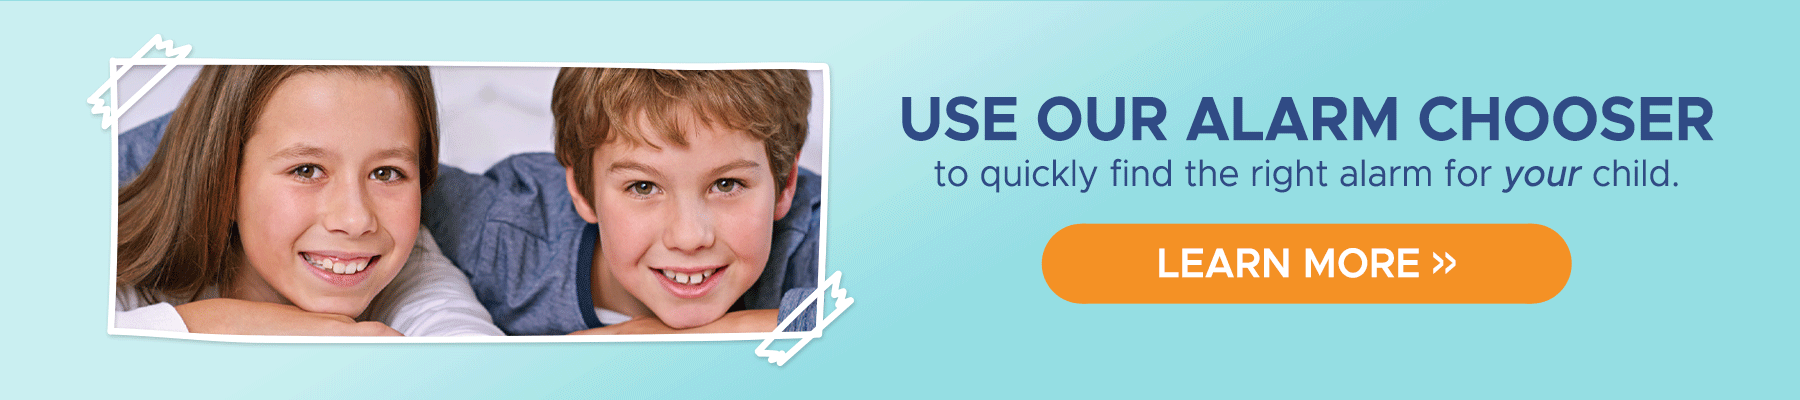 Use our Alarm Chooser to quickly find the right alarm for your child.